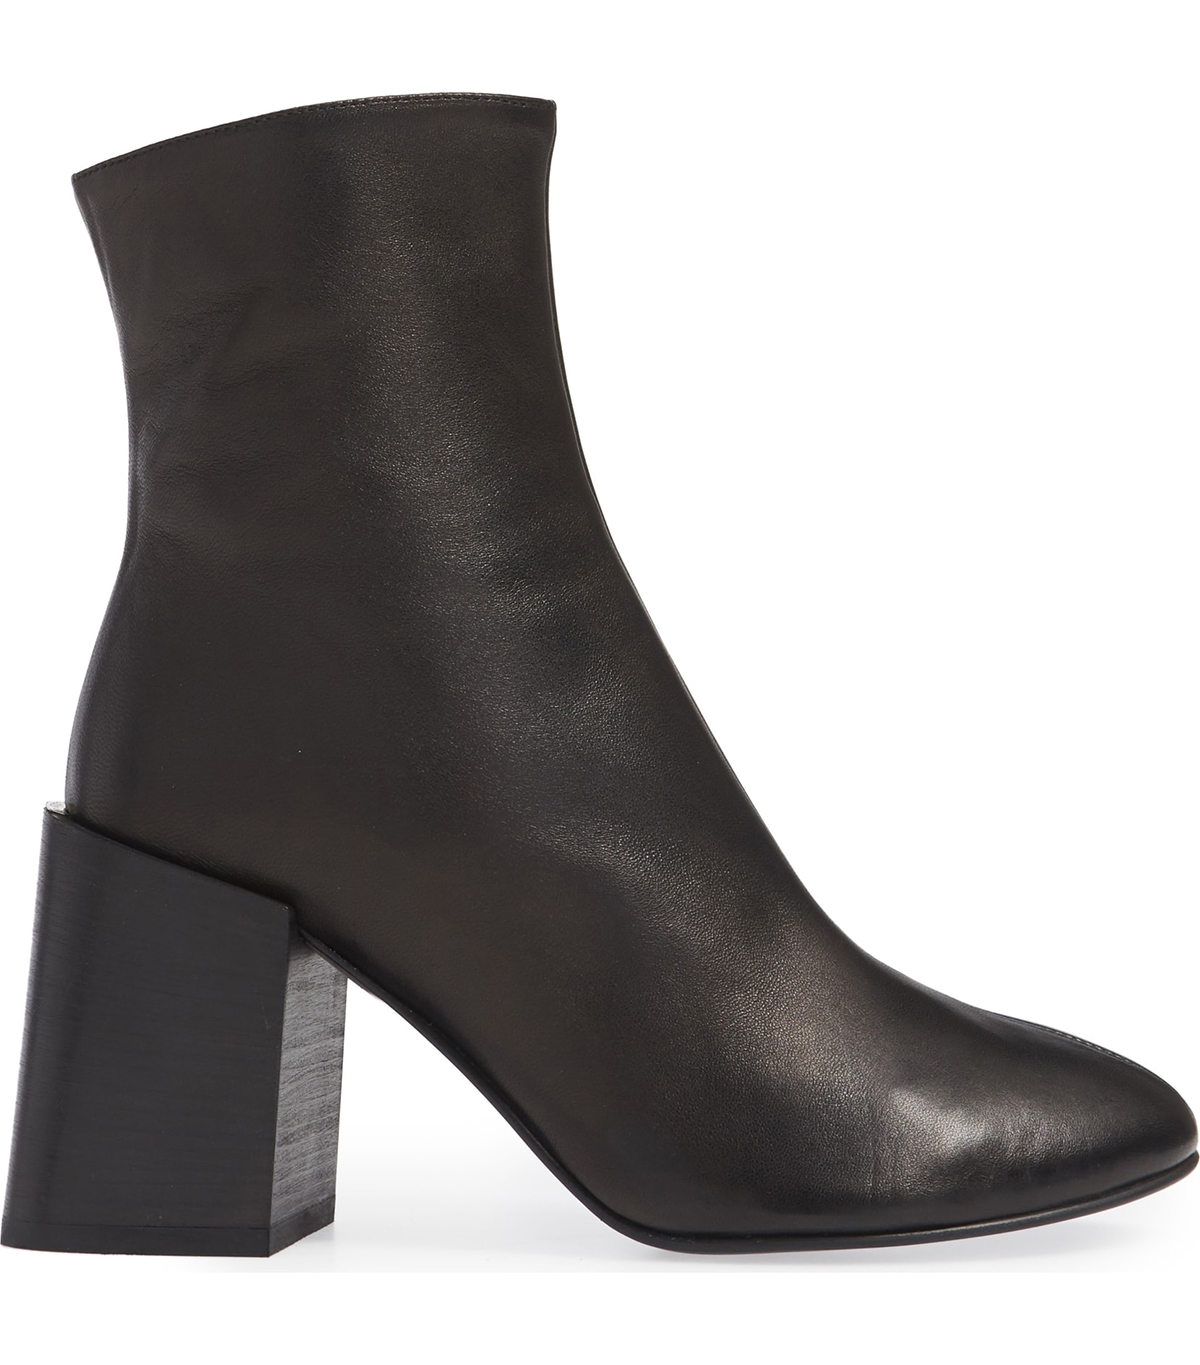 Where to Buy Ankle Boots and Why | Who What Wear